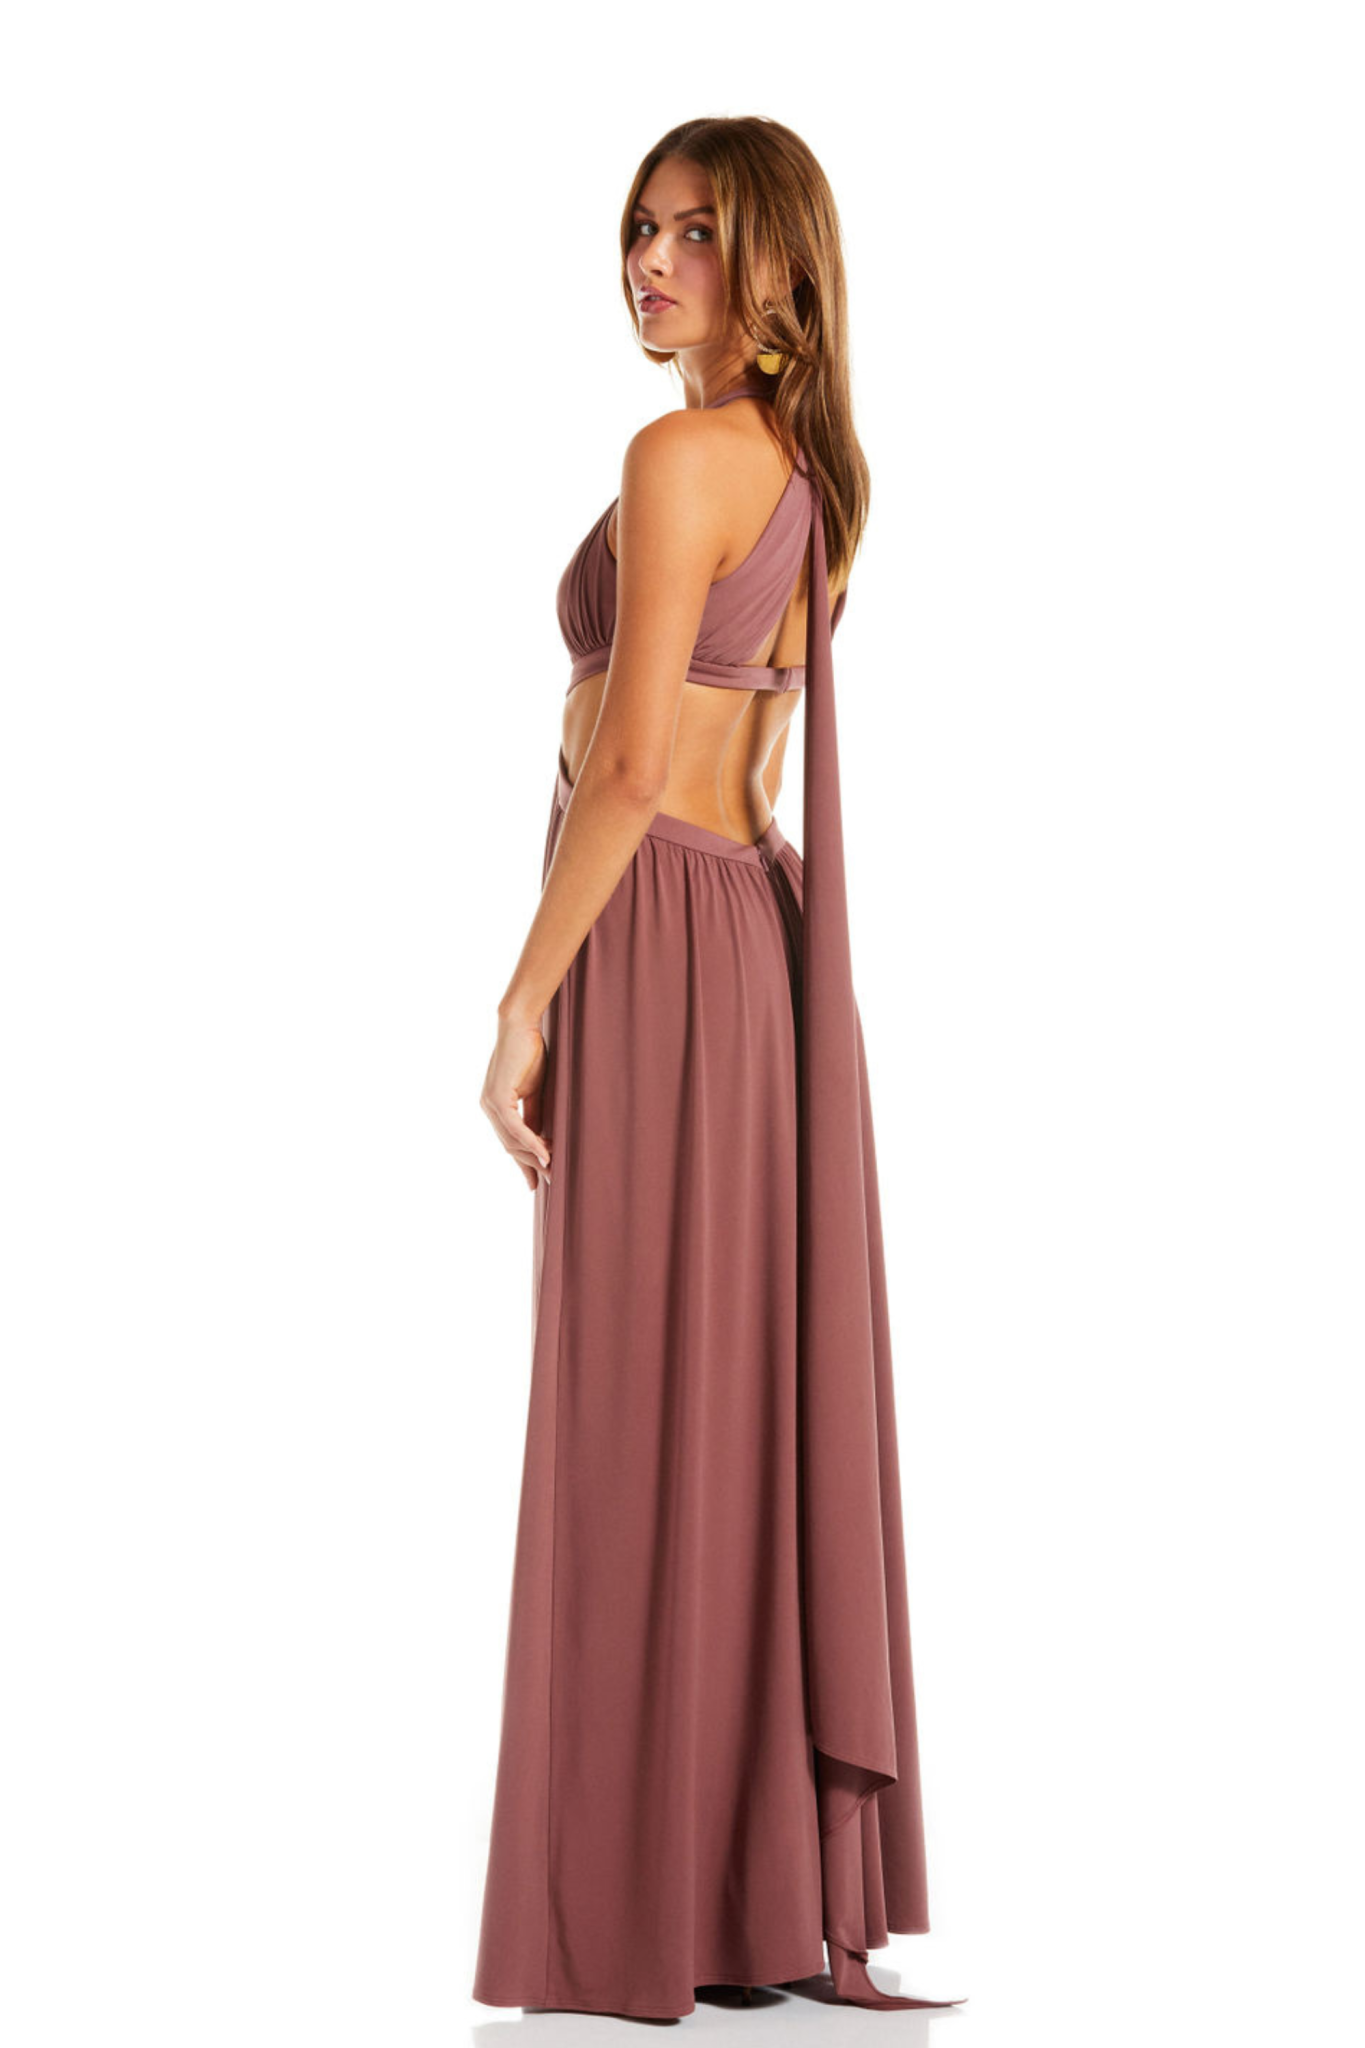 KATIE MAY KATIE MAY TANYA SCULPTURED HALTER CUTOUT GOWN/DRESSES